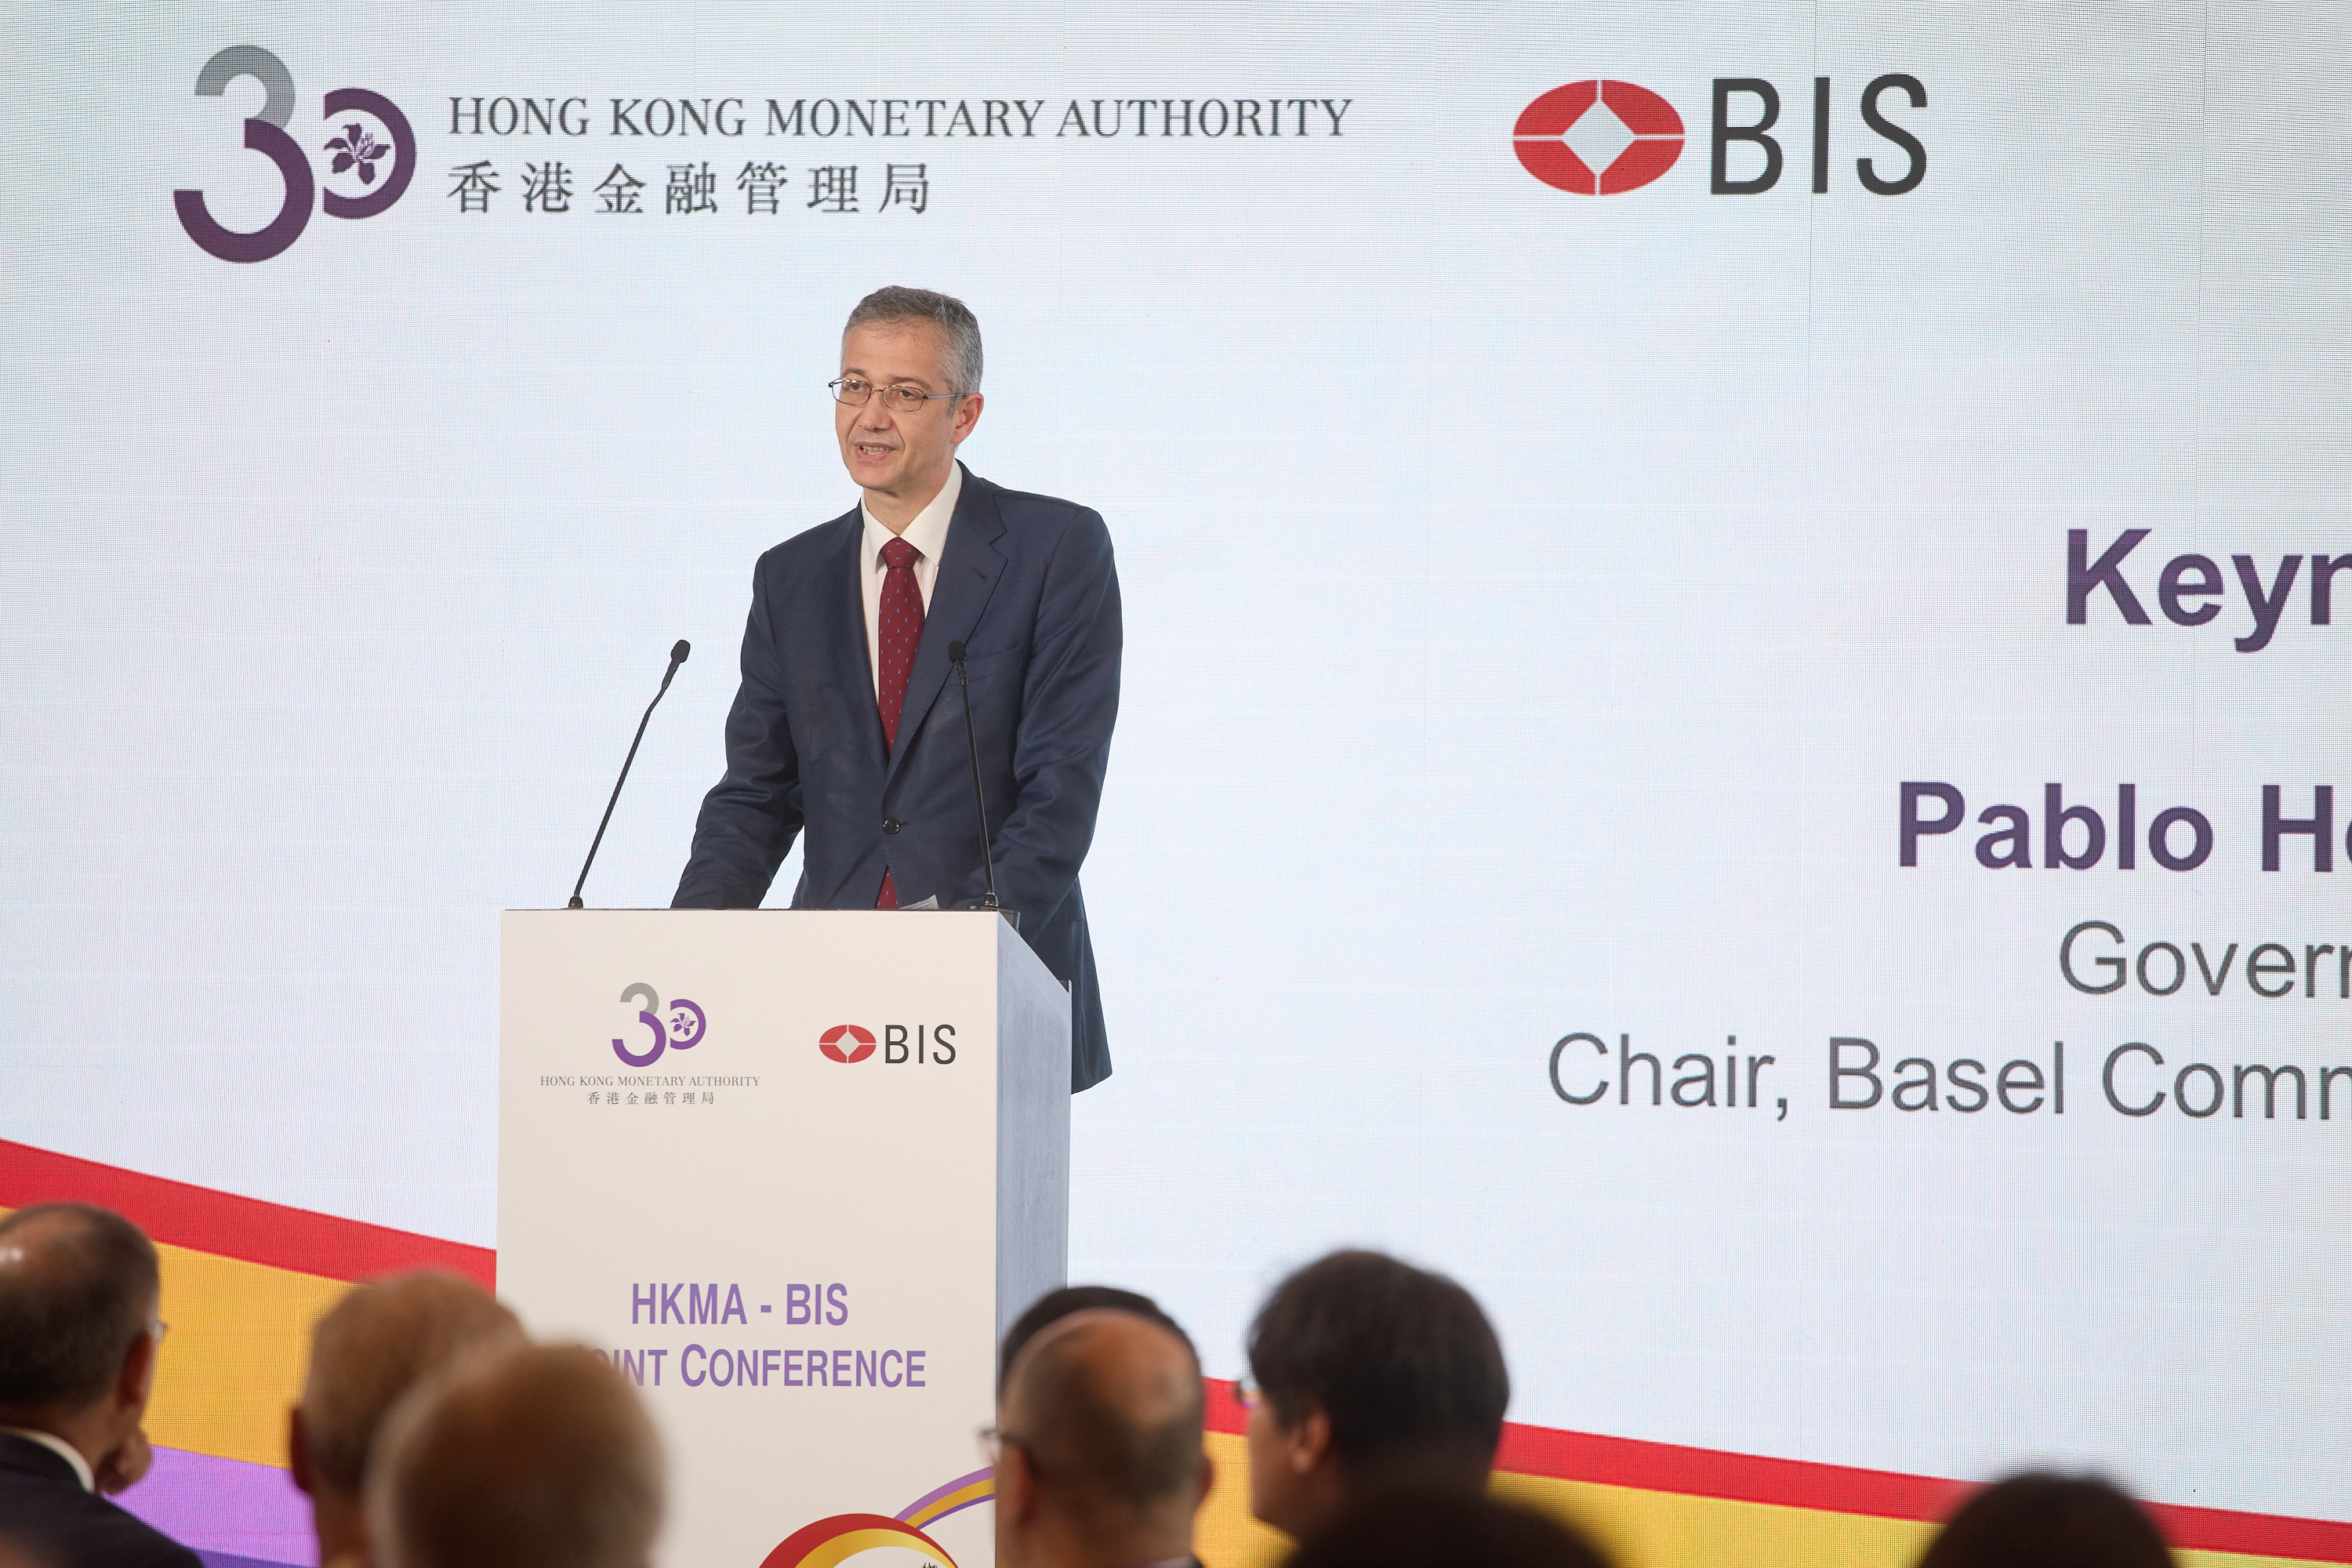 Mr Pablo Hernández de Cos, Governor of the Bank of Spain and Chair of the Basel Committee on Banking Supervision, delivers the keynote speech.